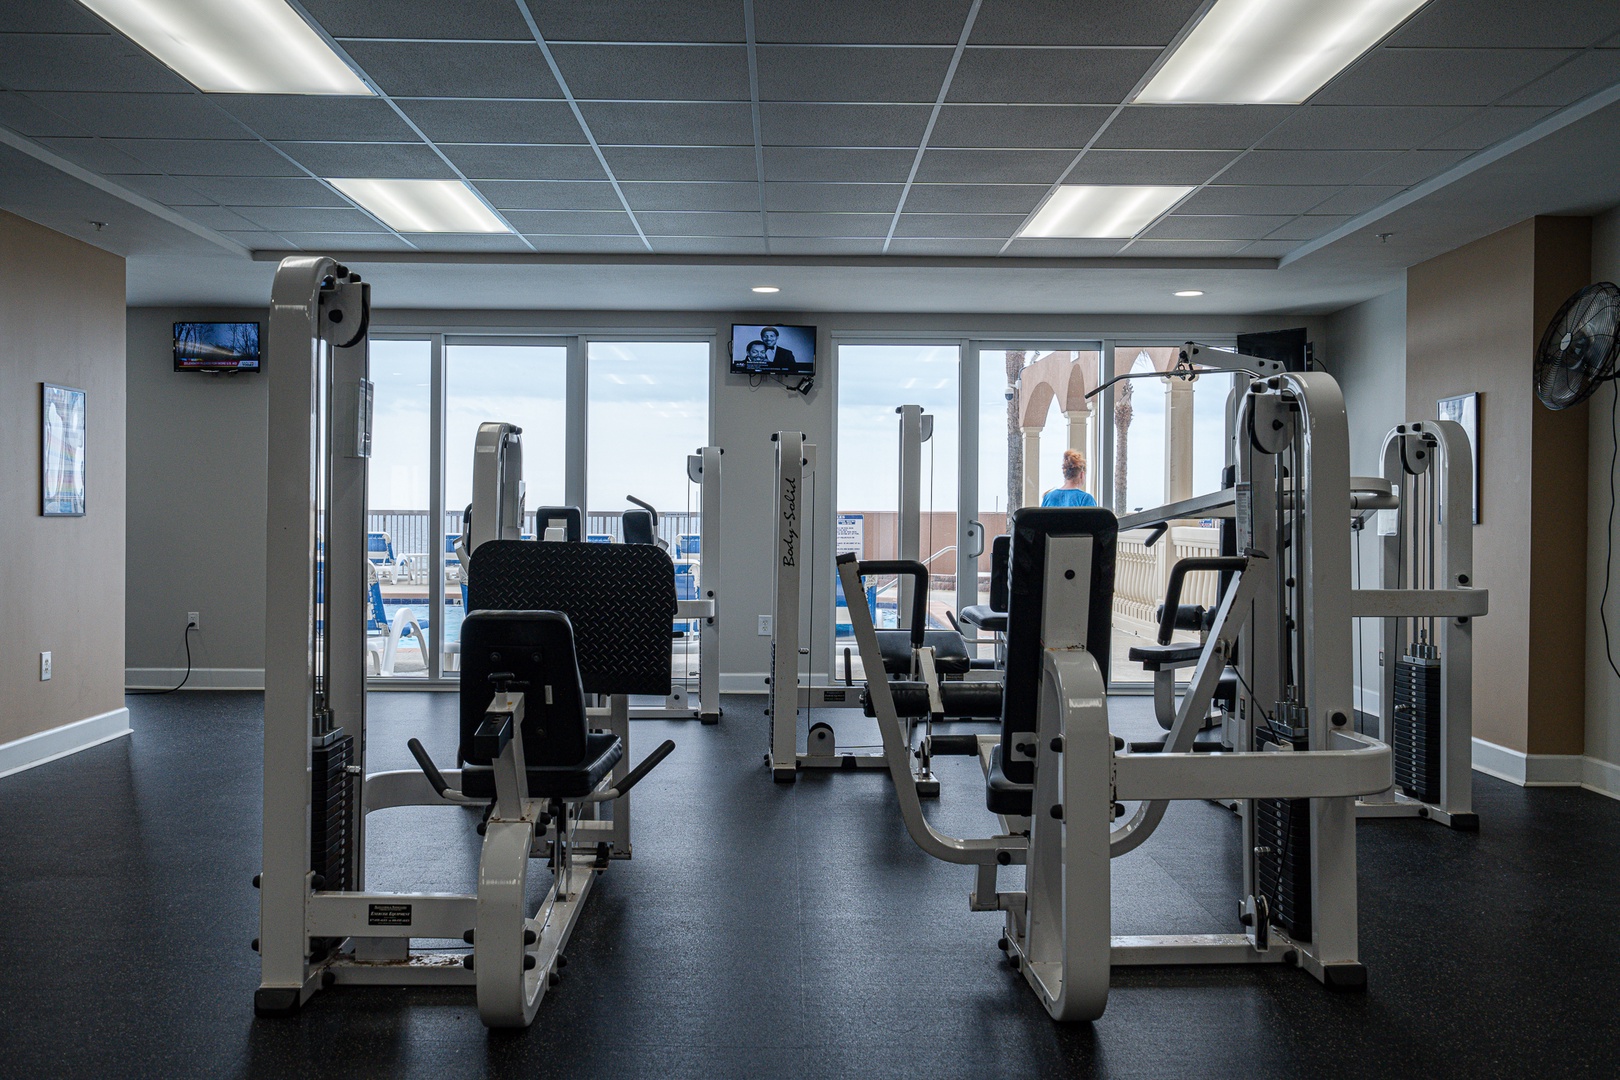 Crush your goals in the well-equipped community fitness room